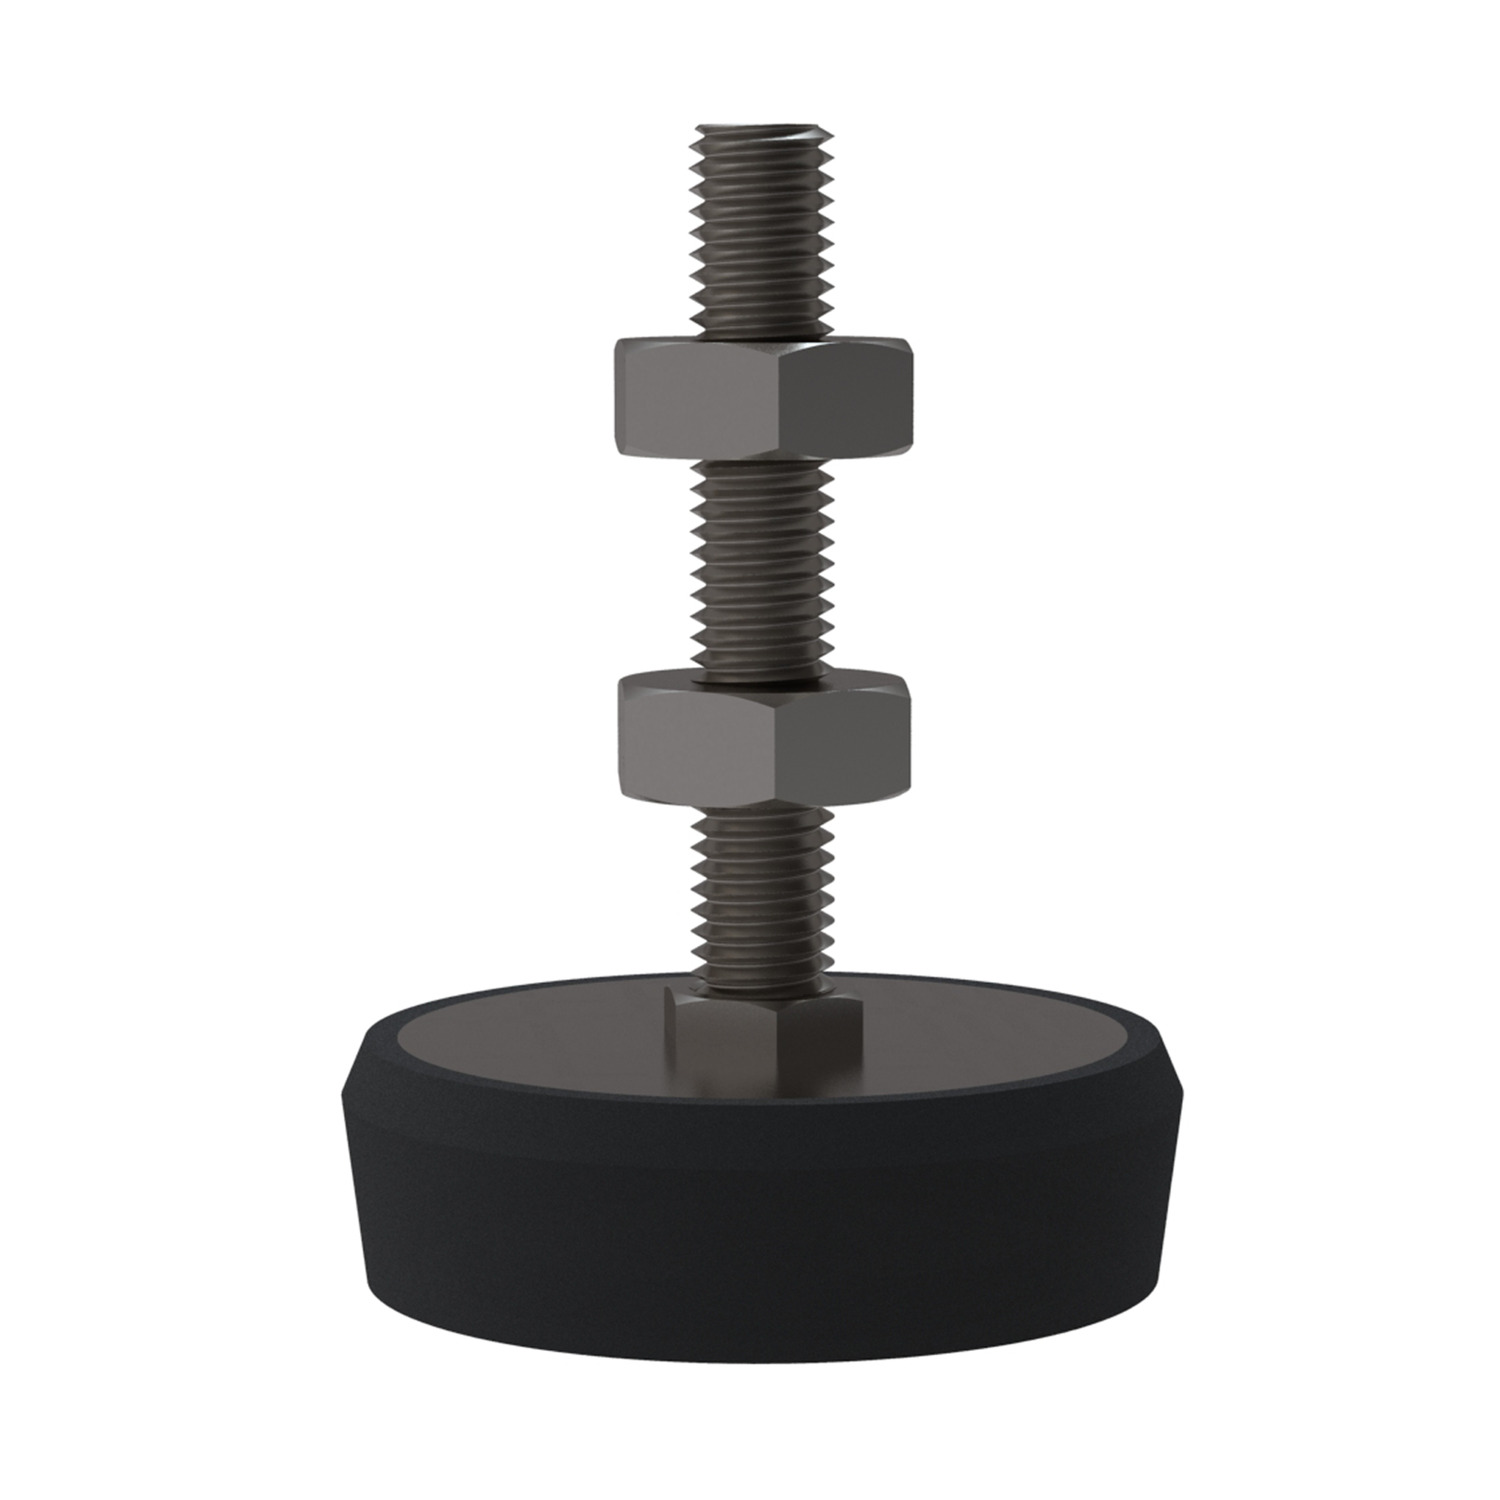 Stainless Machine Mounts rubber base A 304 stainless machine mount with a 65 Shore A rubber base best suited for smooth floors. Load capacity is from 0 - 2000Kgf across the product range.